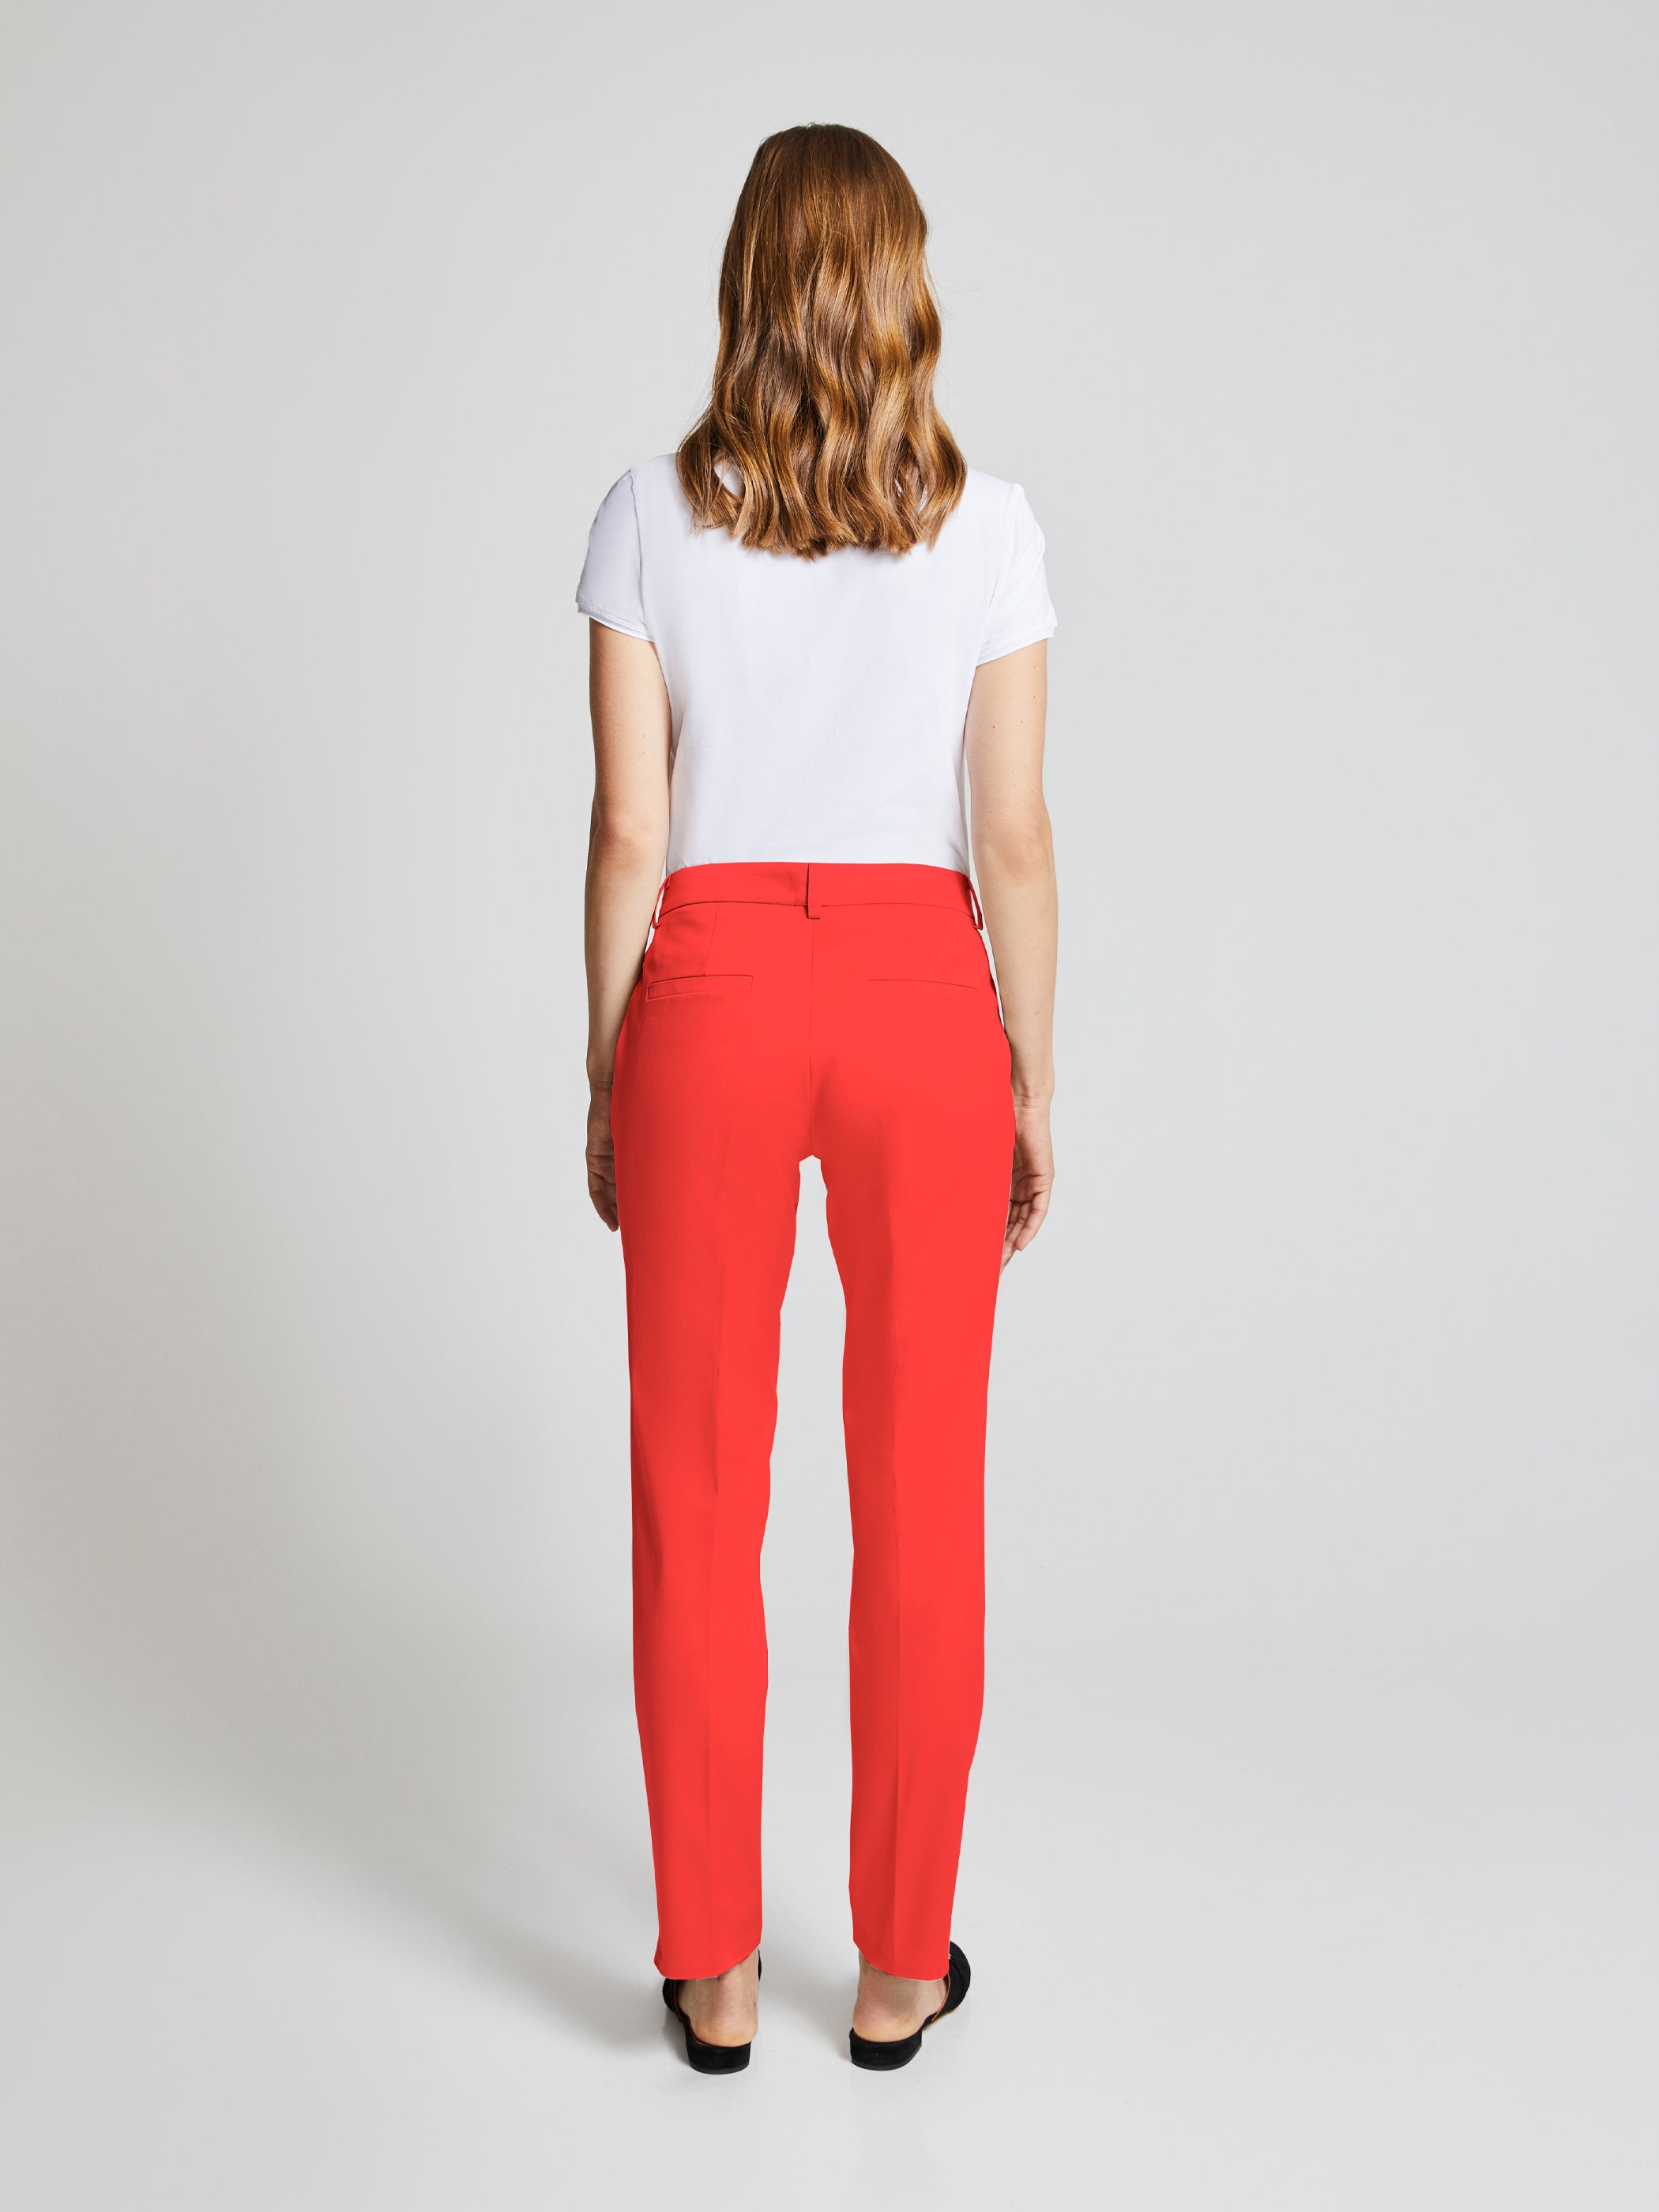 Jamy Trousers